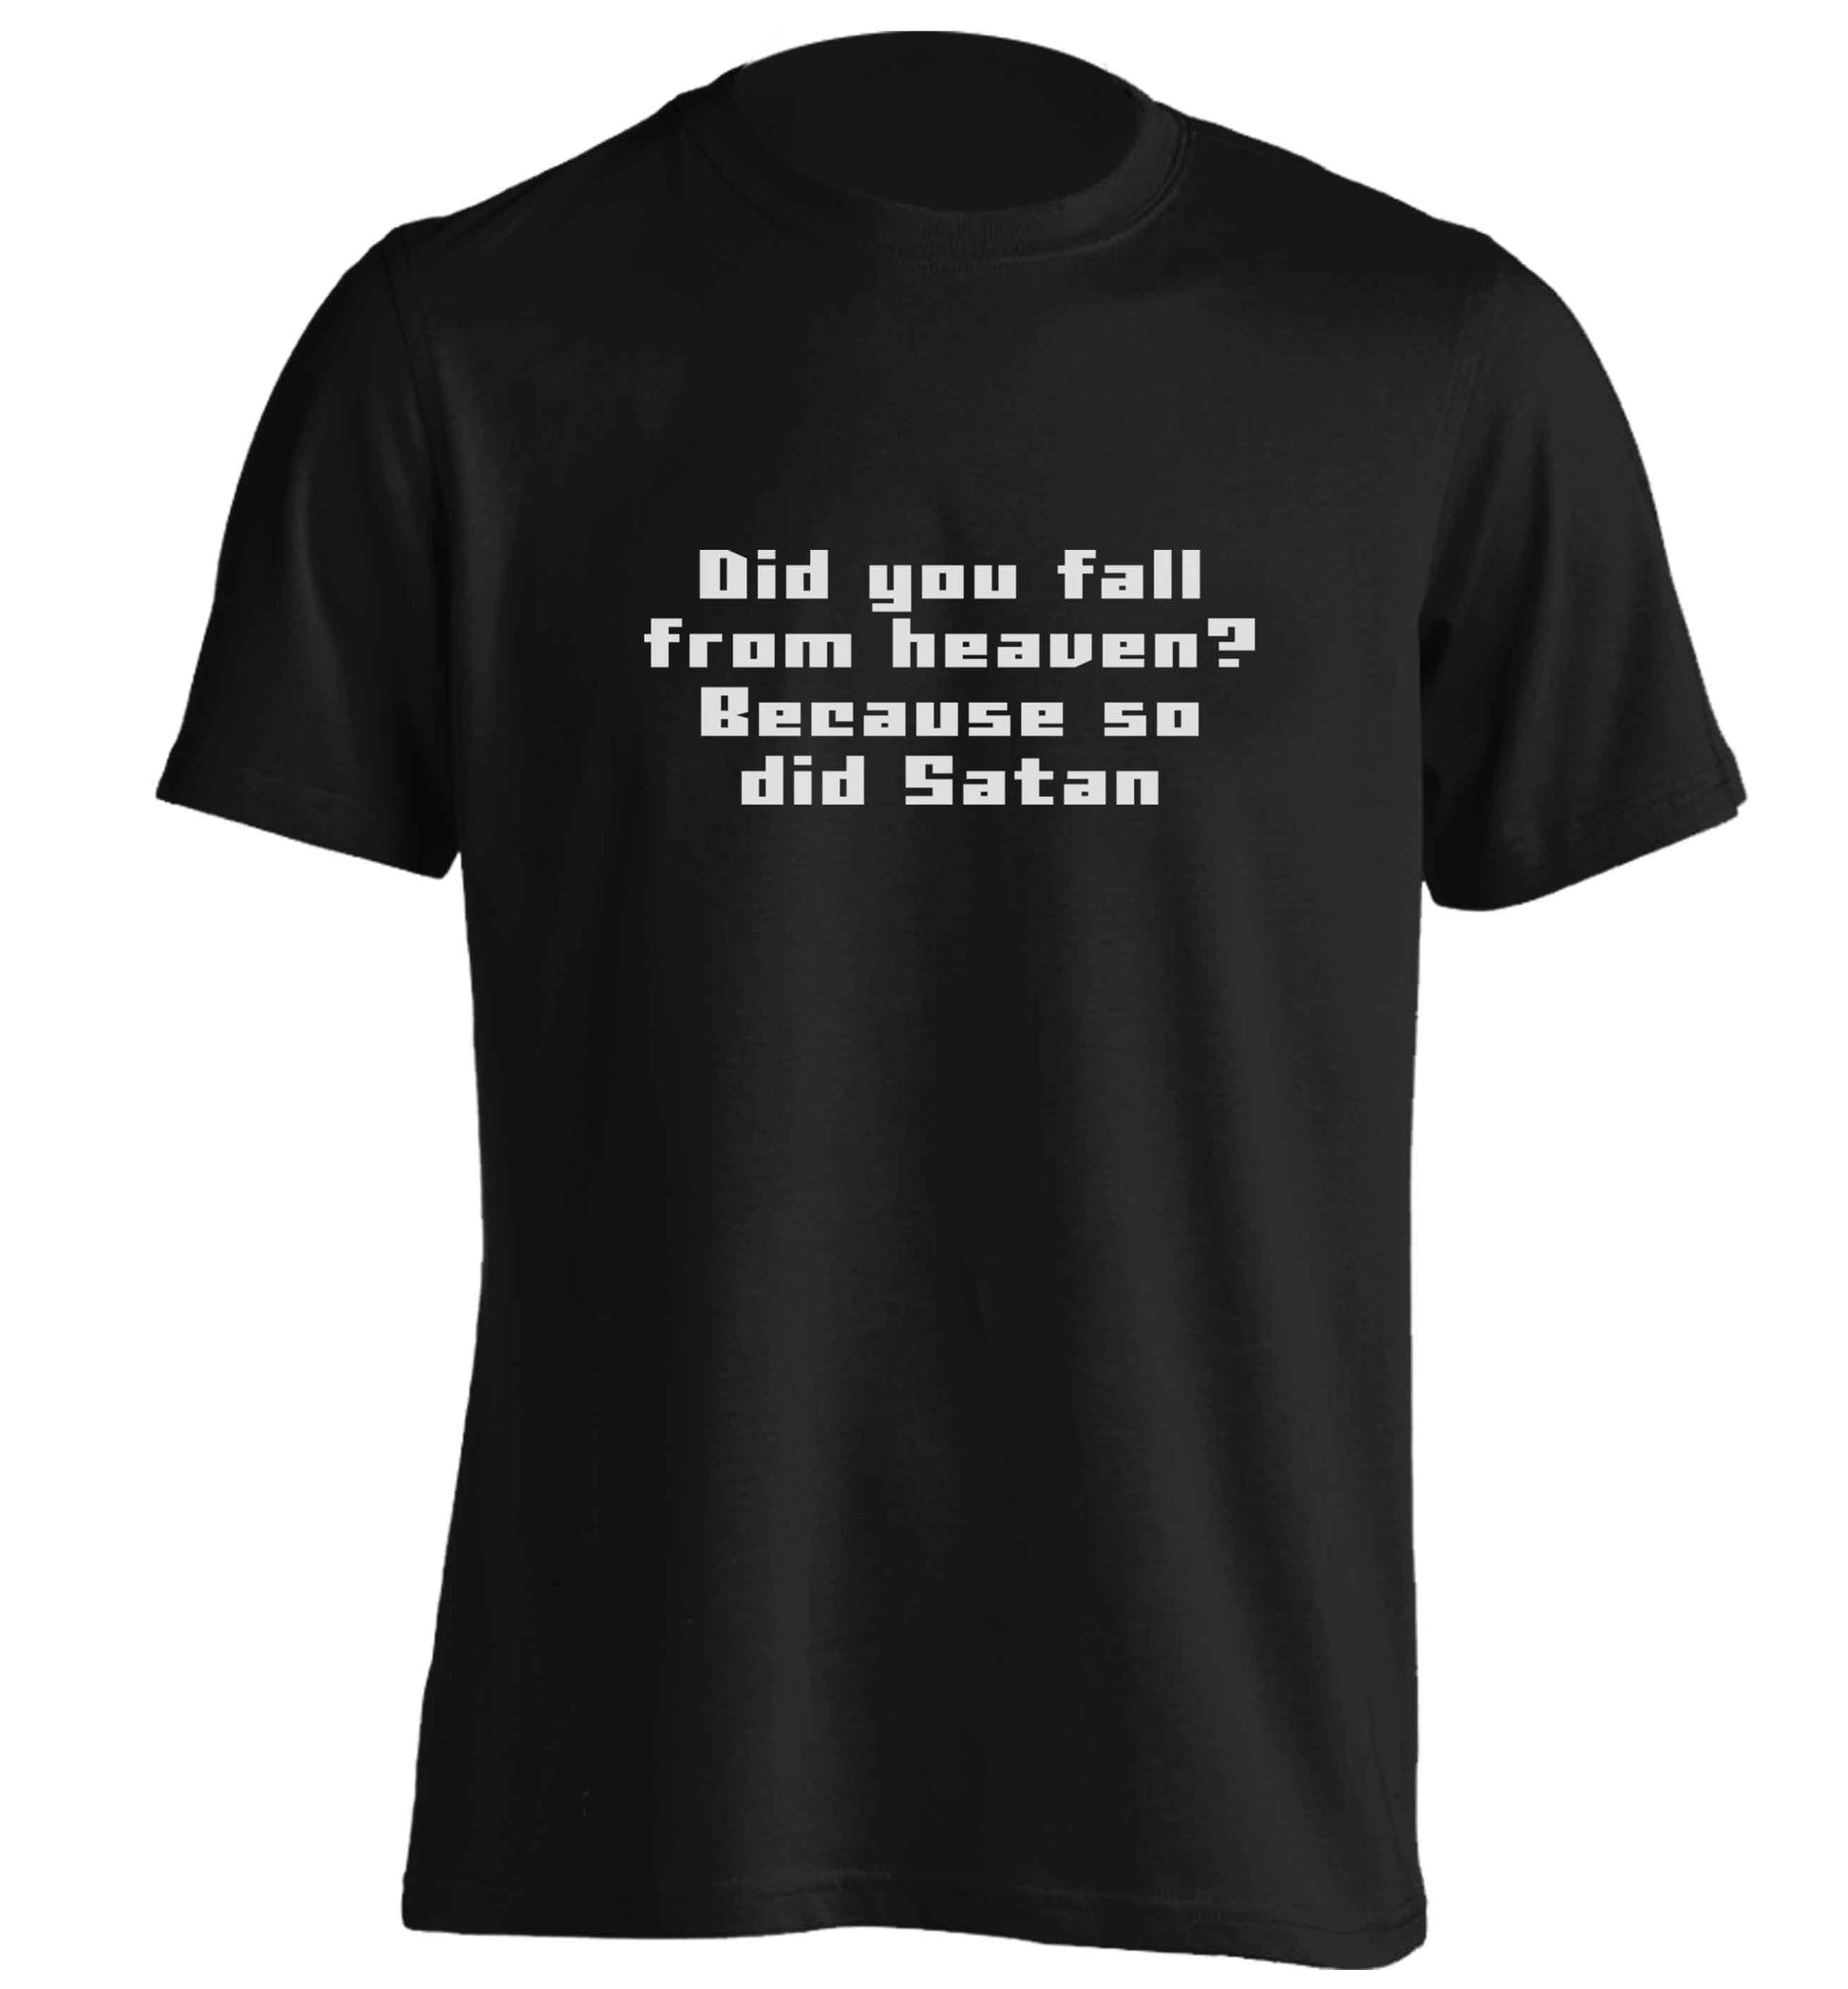 Did you fall from Heaven because so did Satan adults unisex black Tshirt 2XL